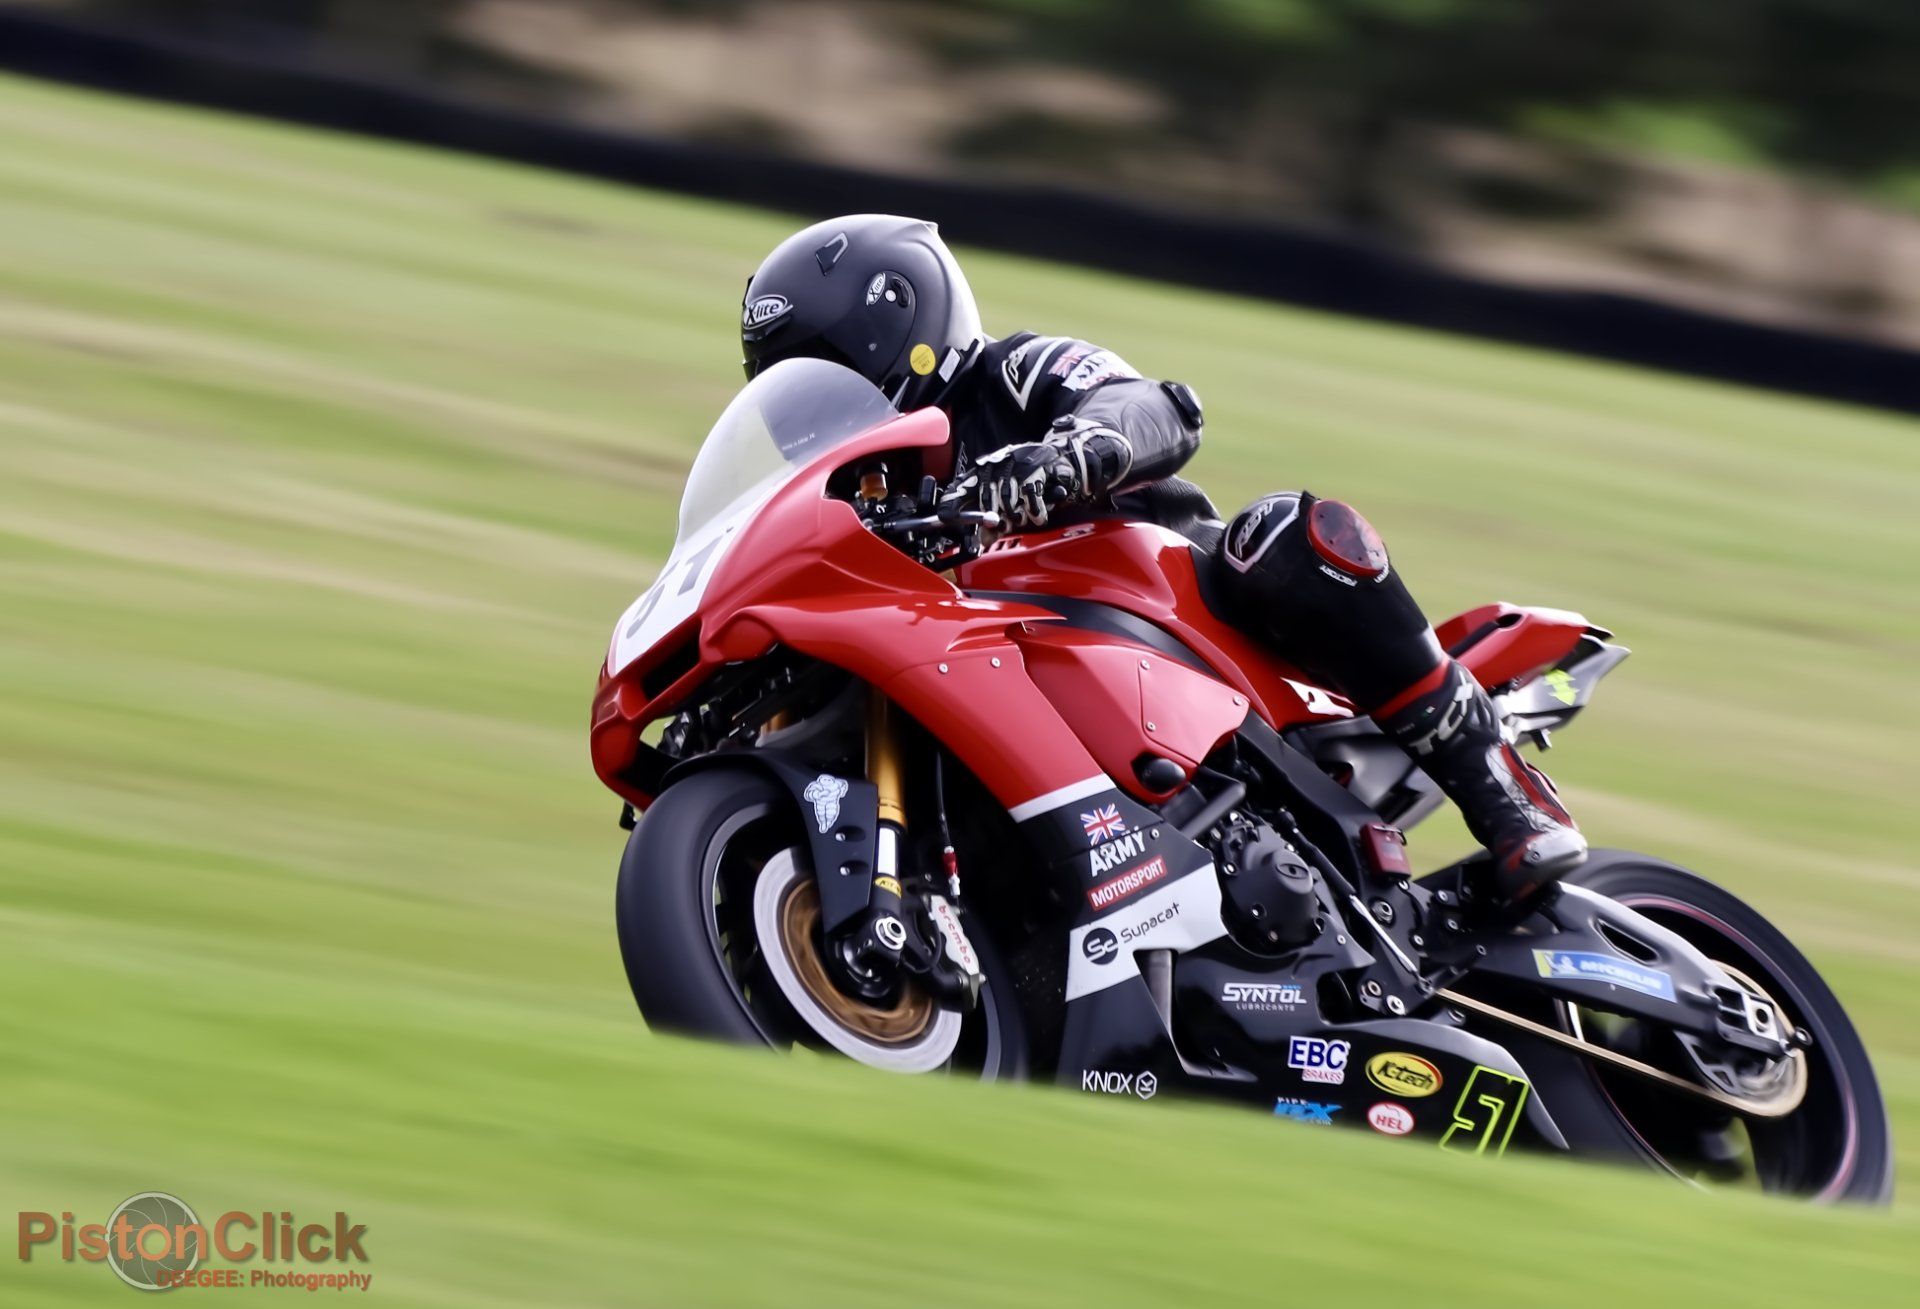 Inter-Services Motorcycle Racing